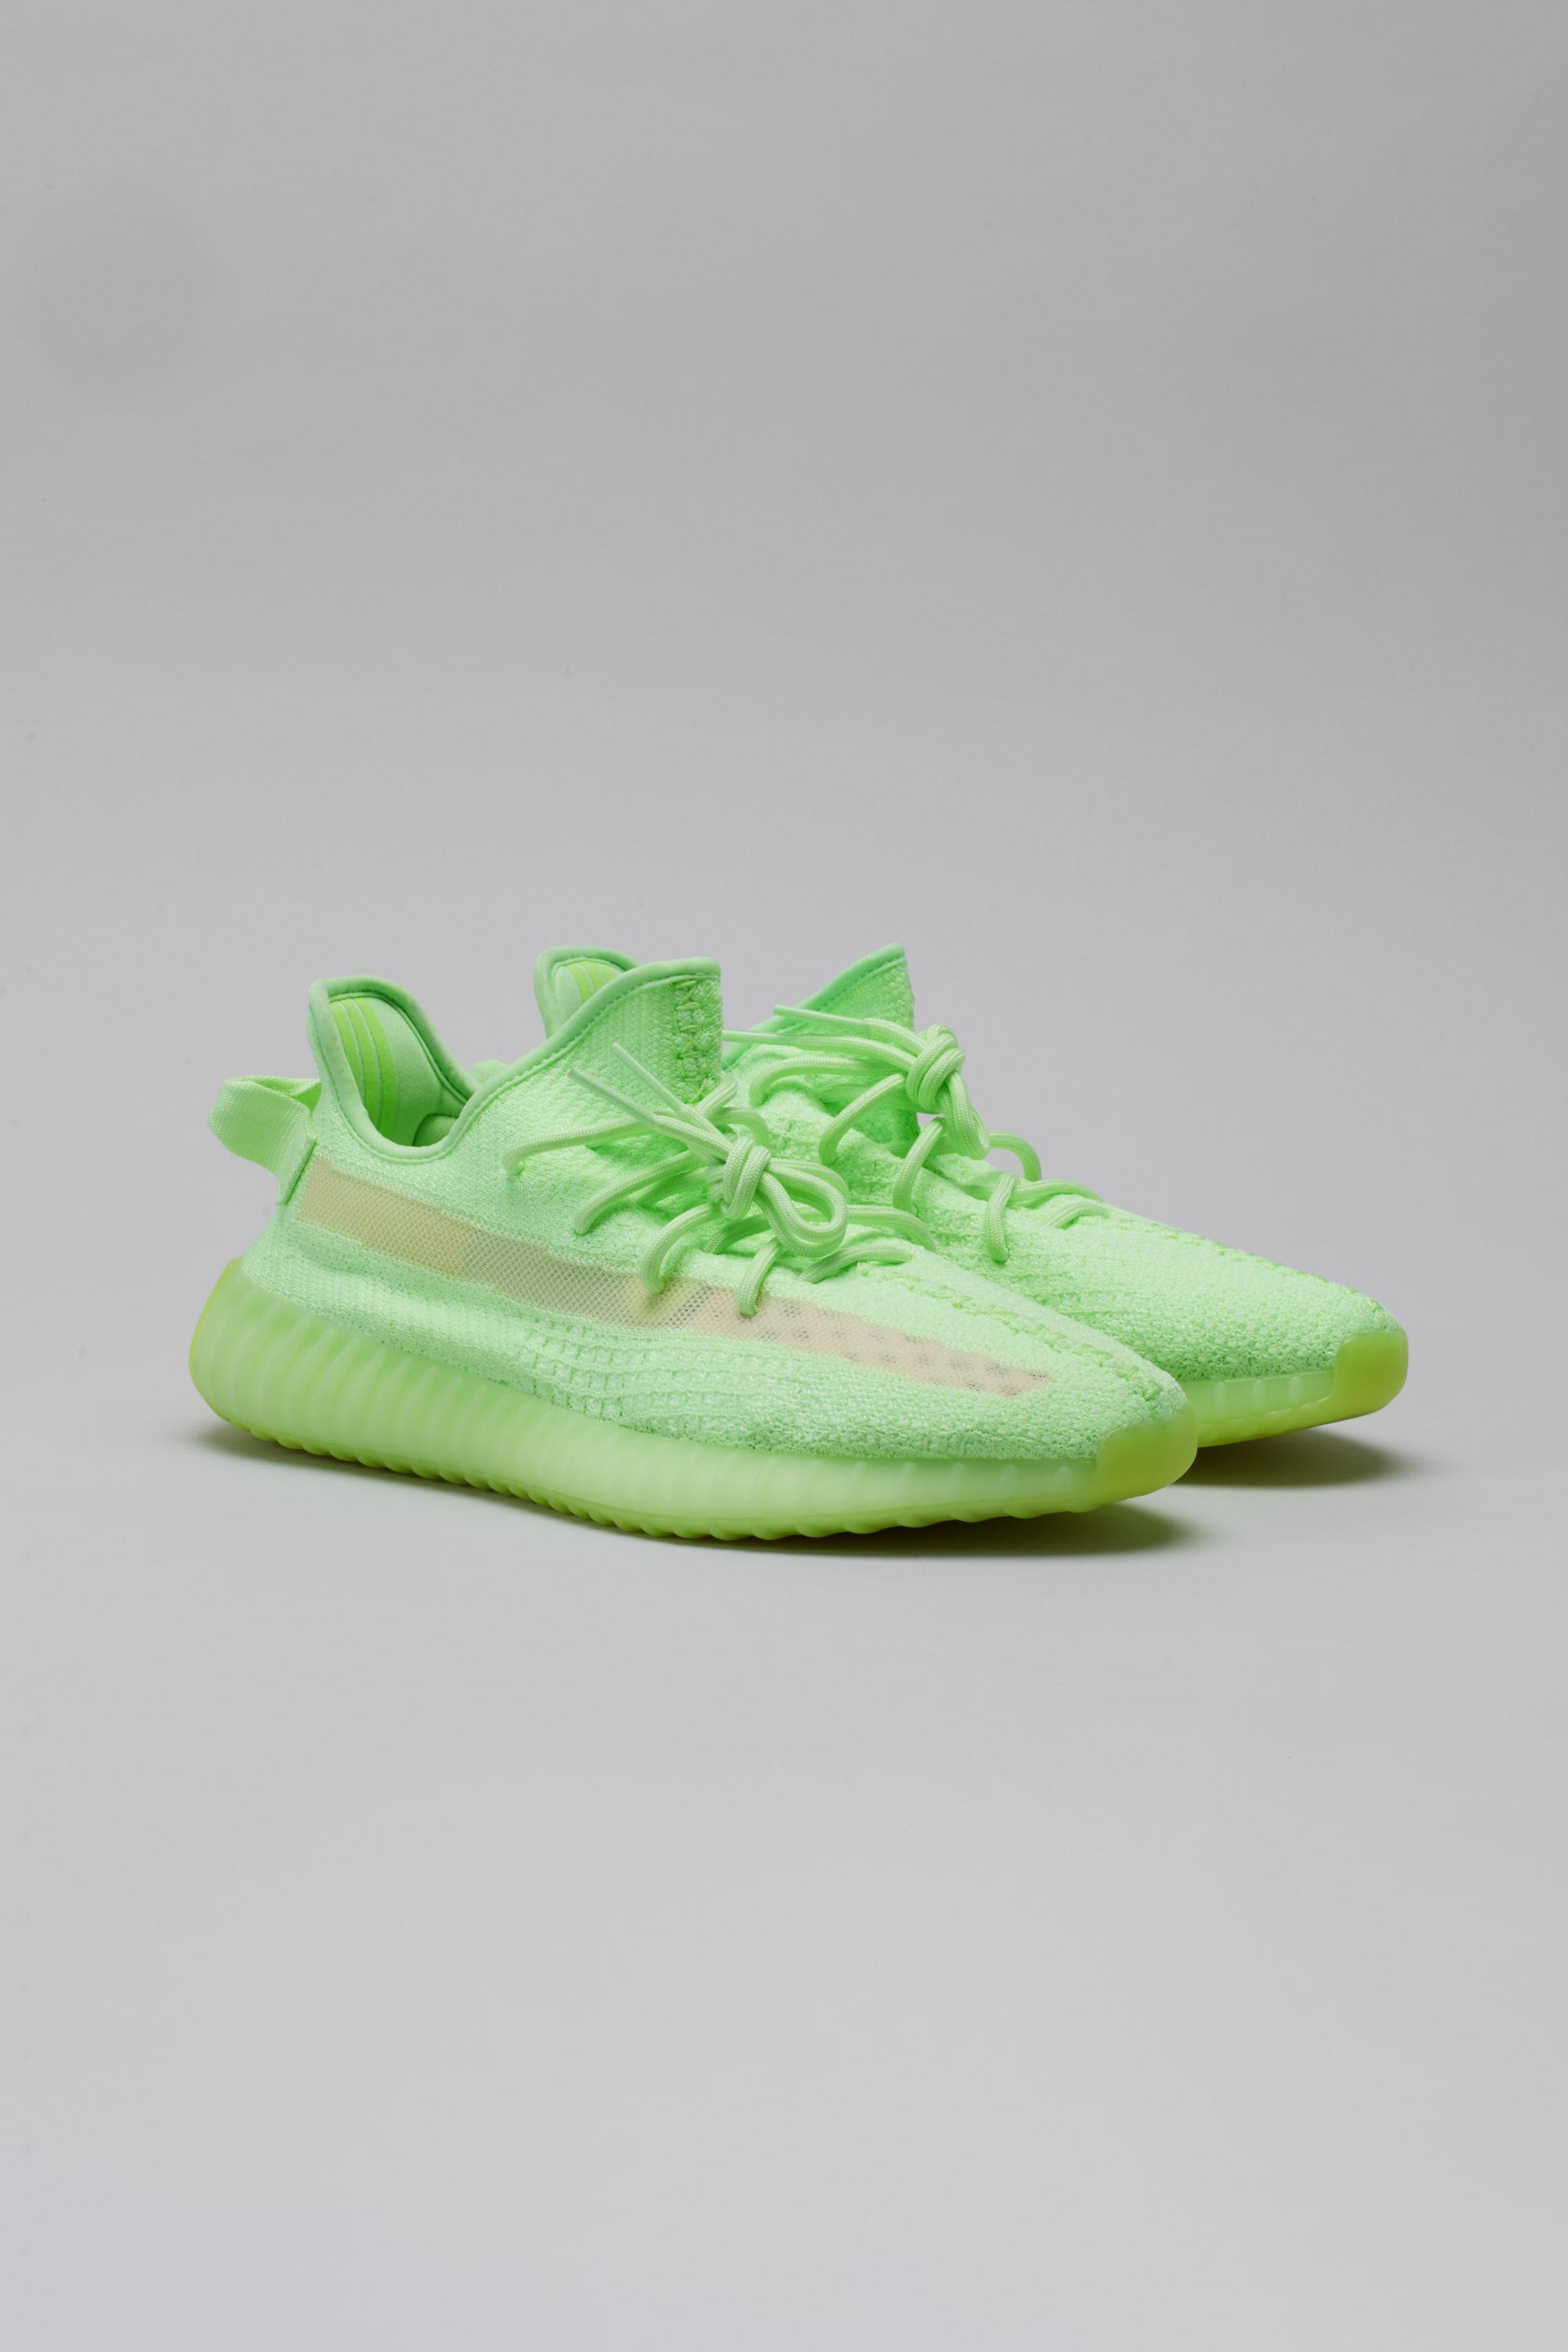 Yeezy Boost 350 Glow - By The Numbers - StockX News